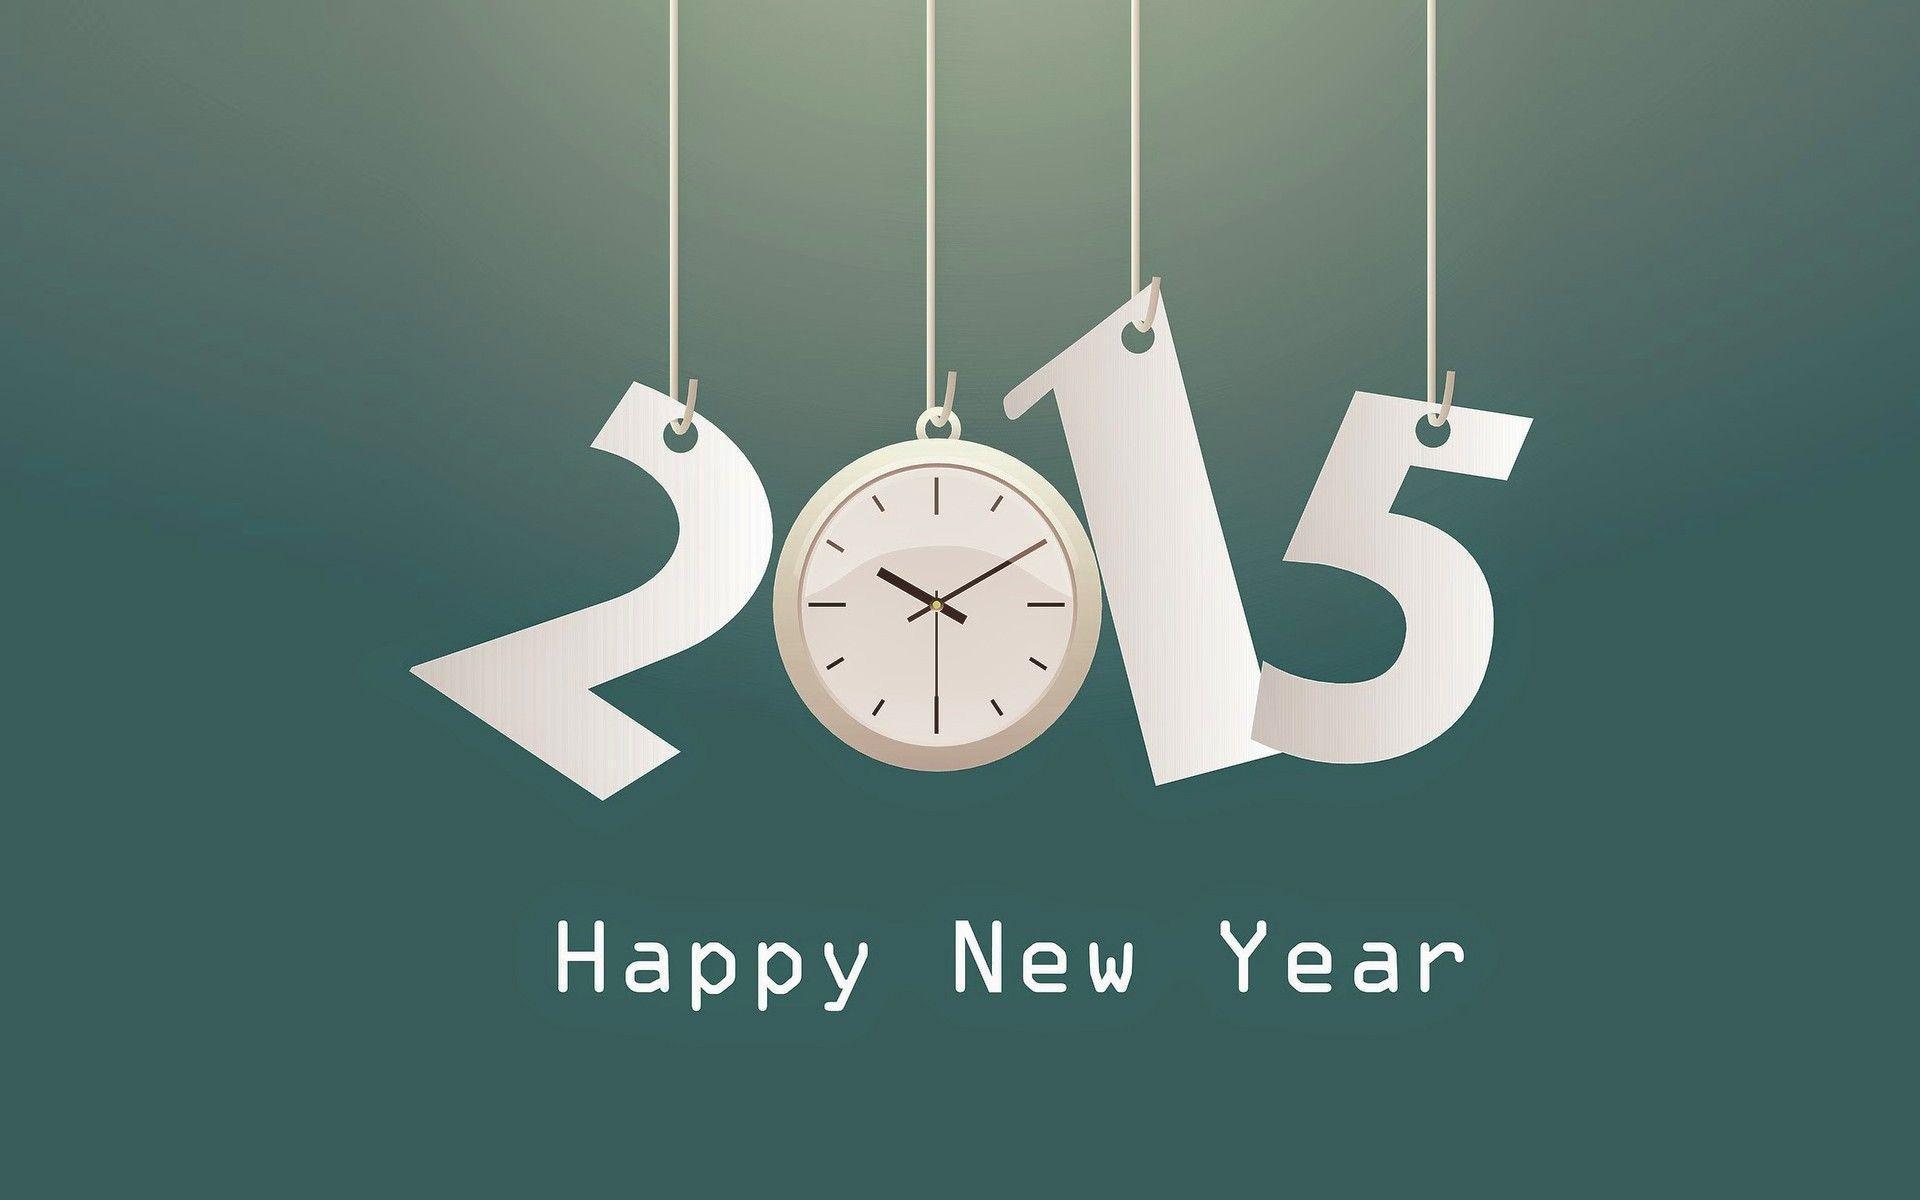 Happy New Year 2015 HD 3D Animated Image Free Download